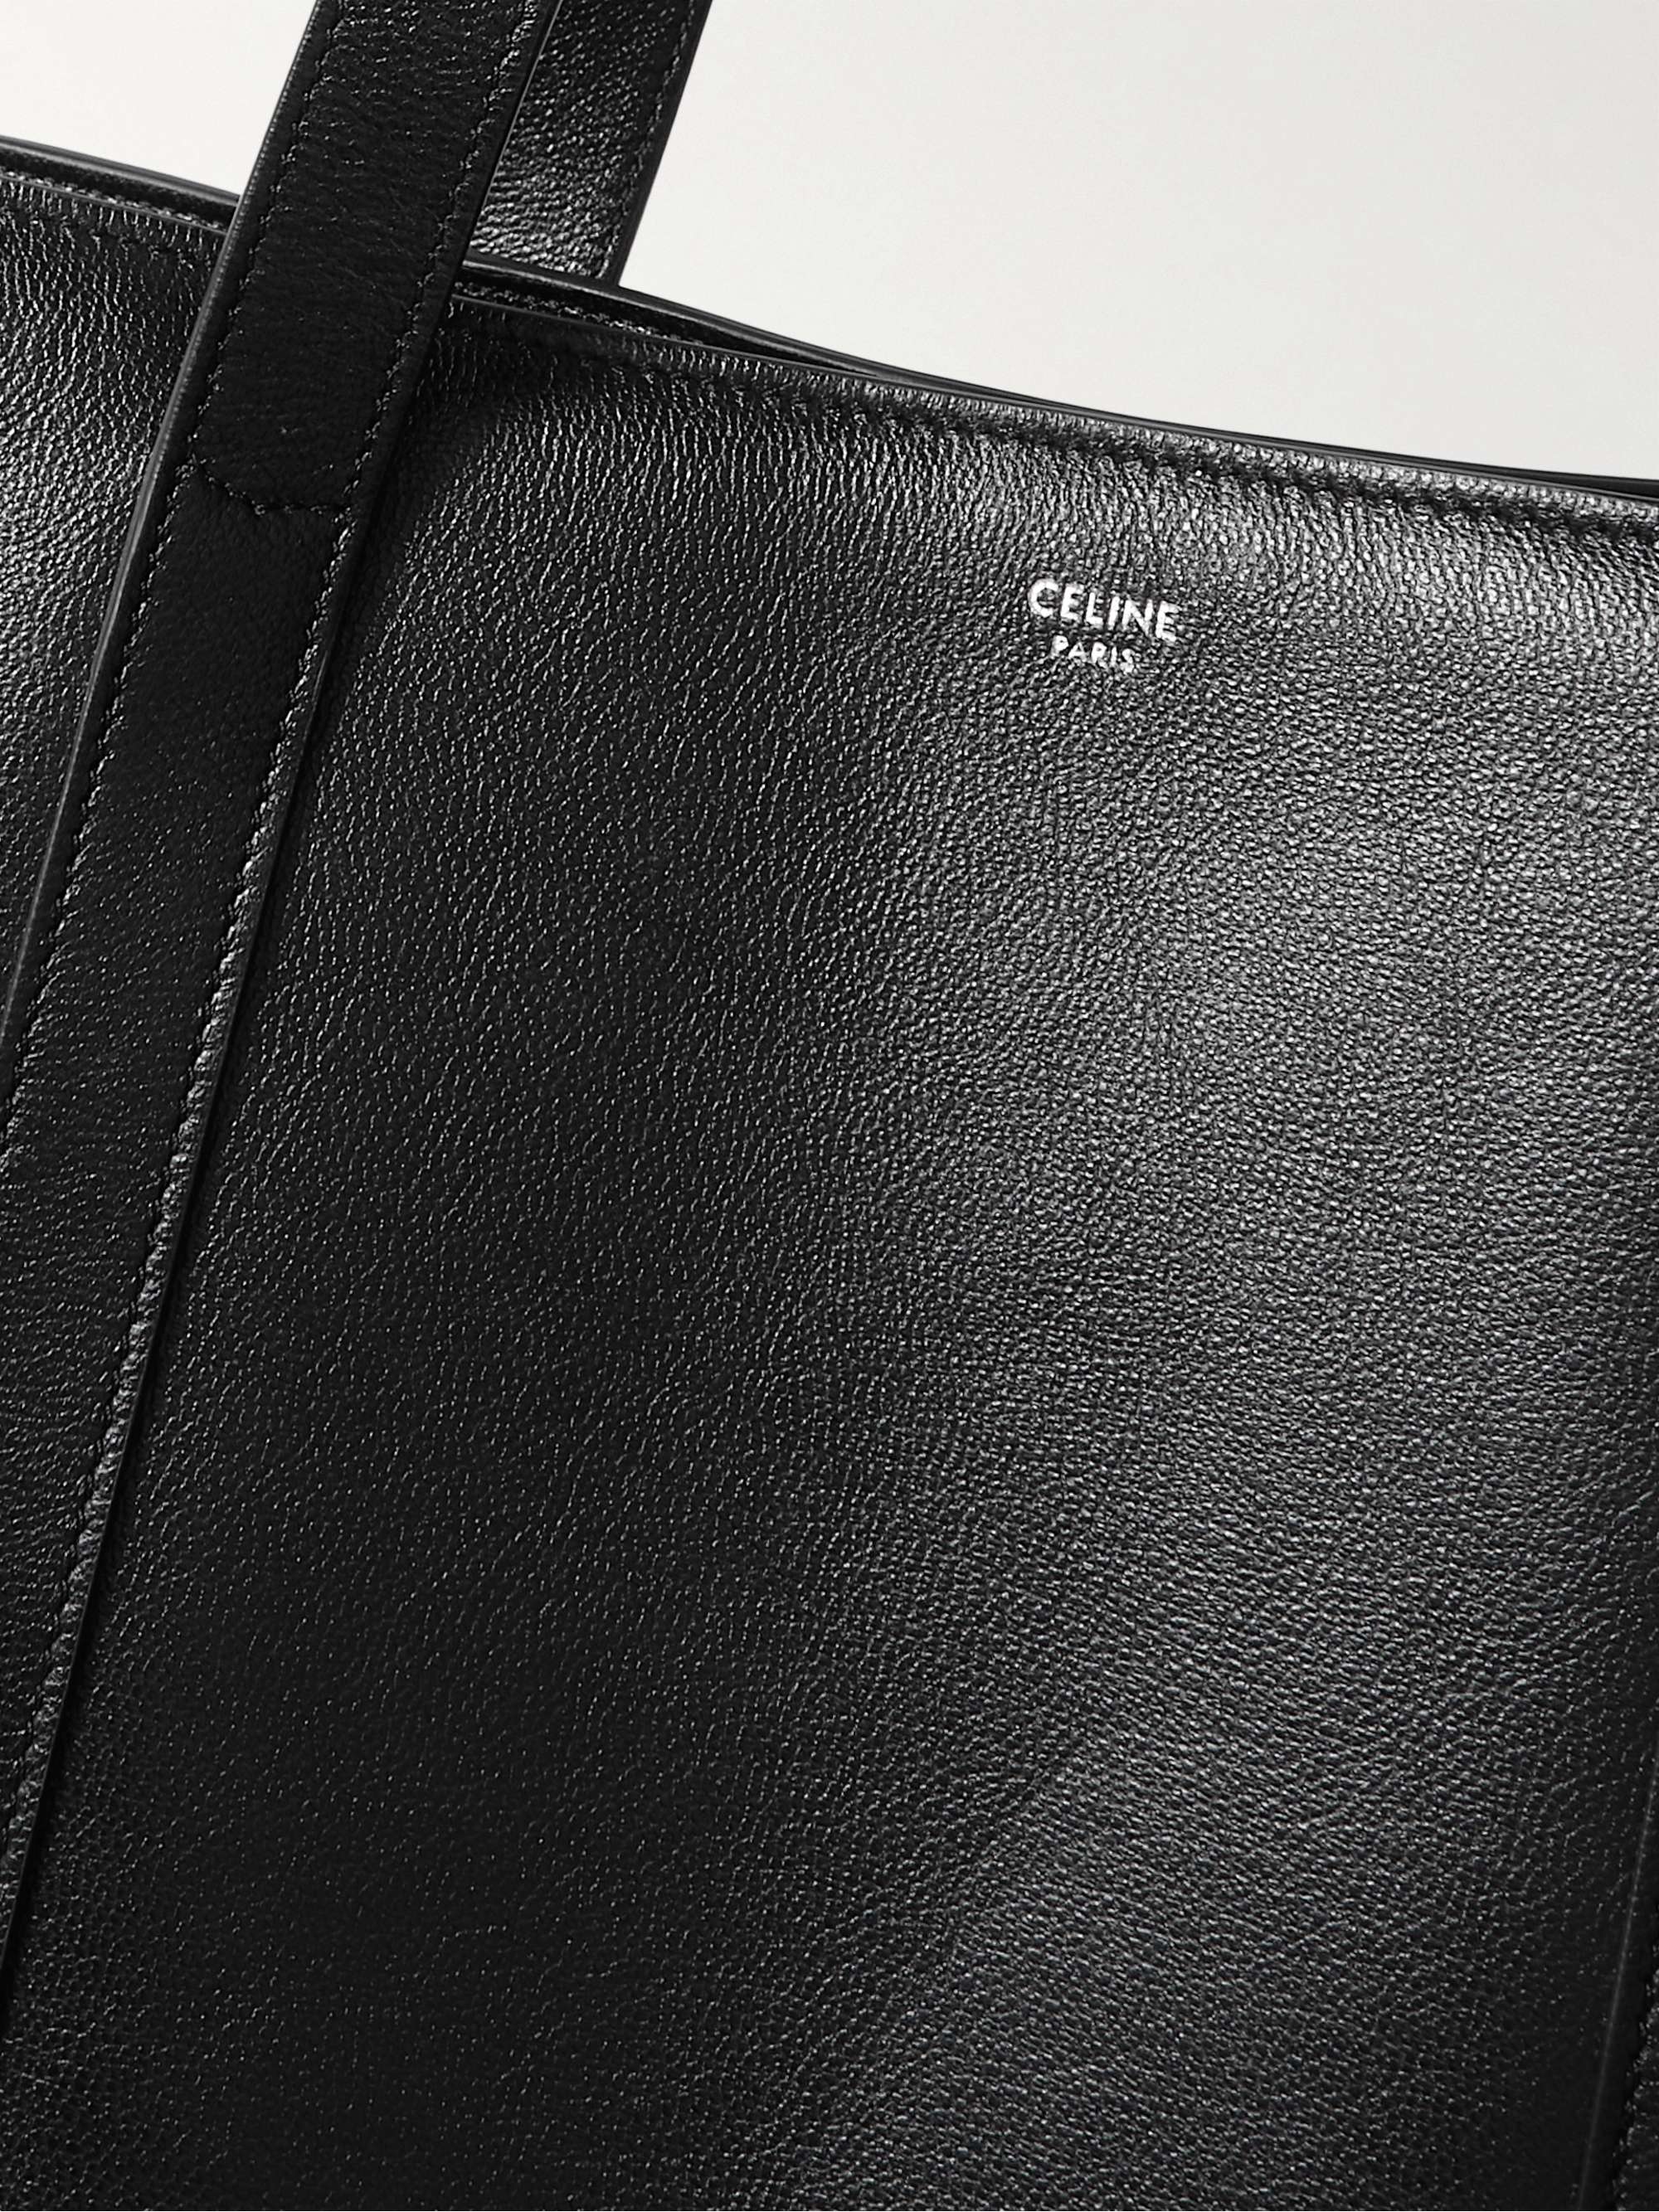 CELINE HOMME Museum Leather Tote Bag